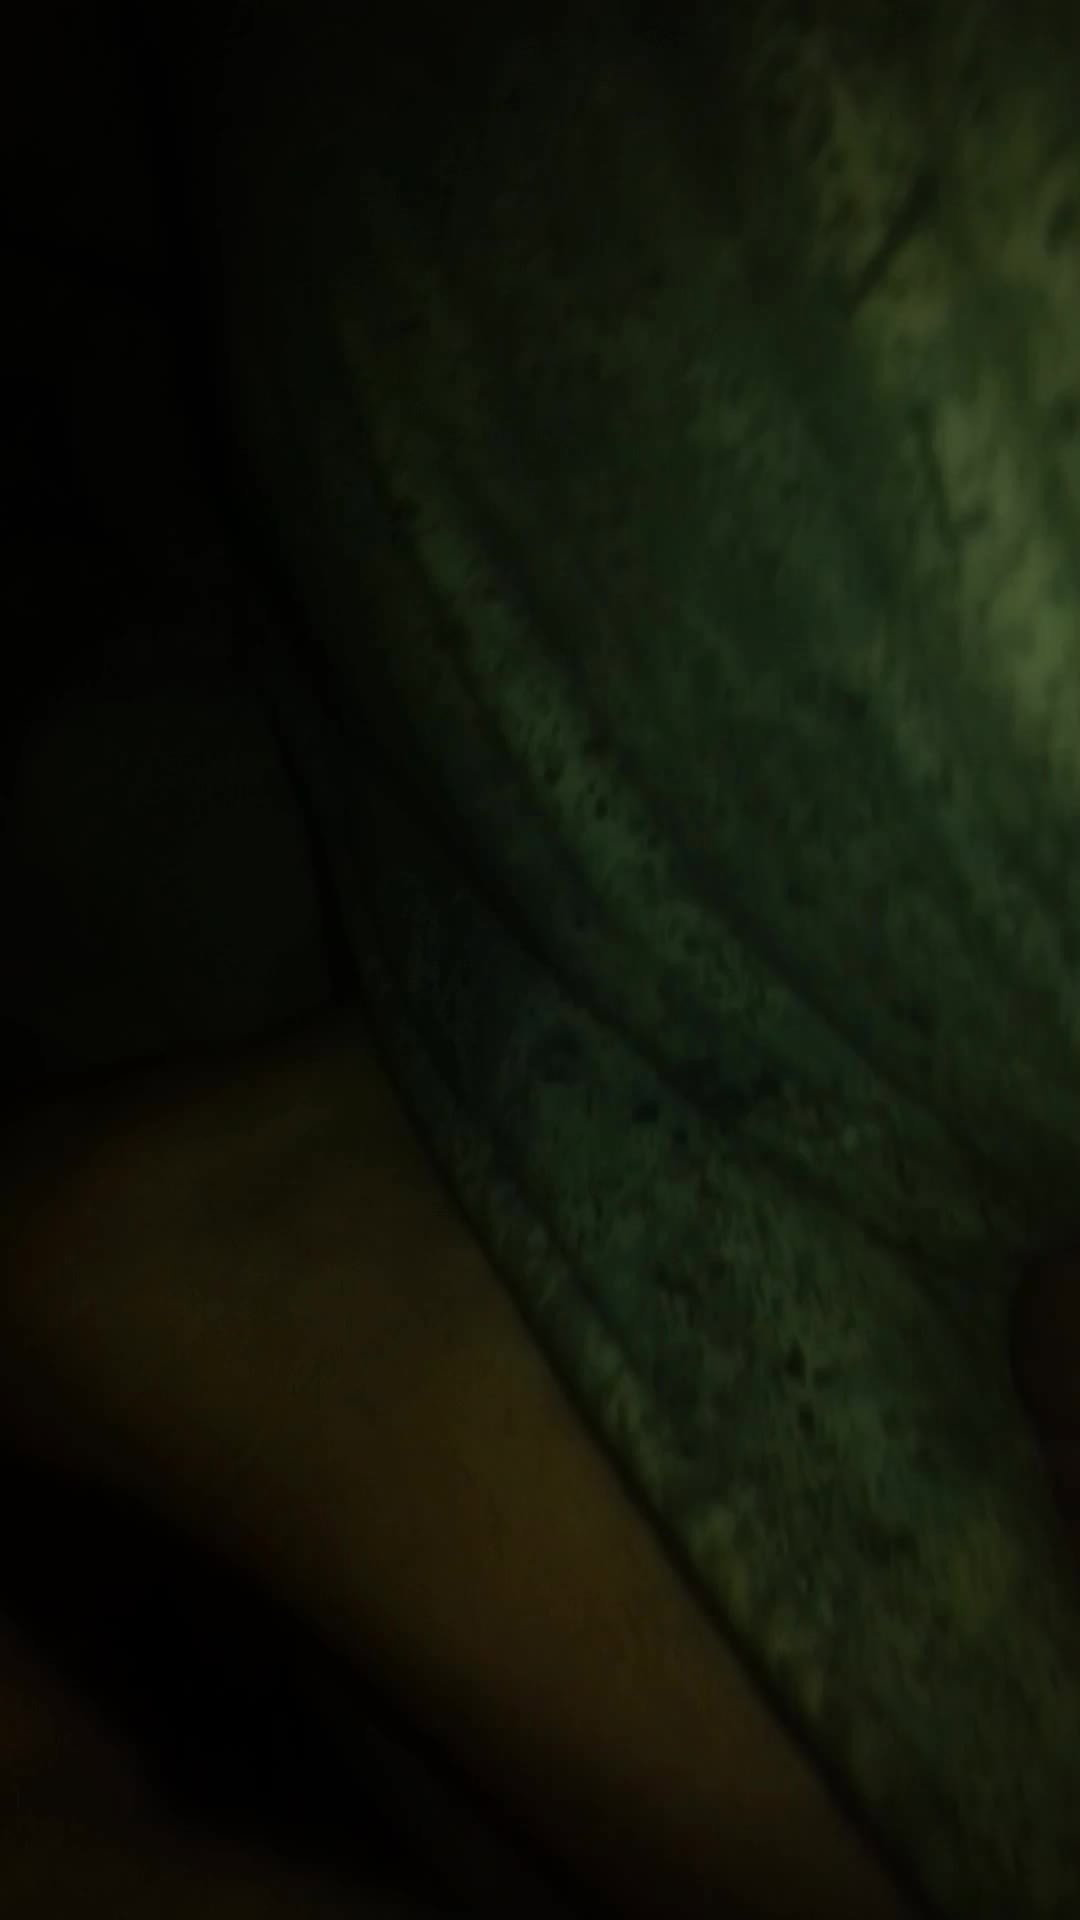 Video post by sexysoderpop